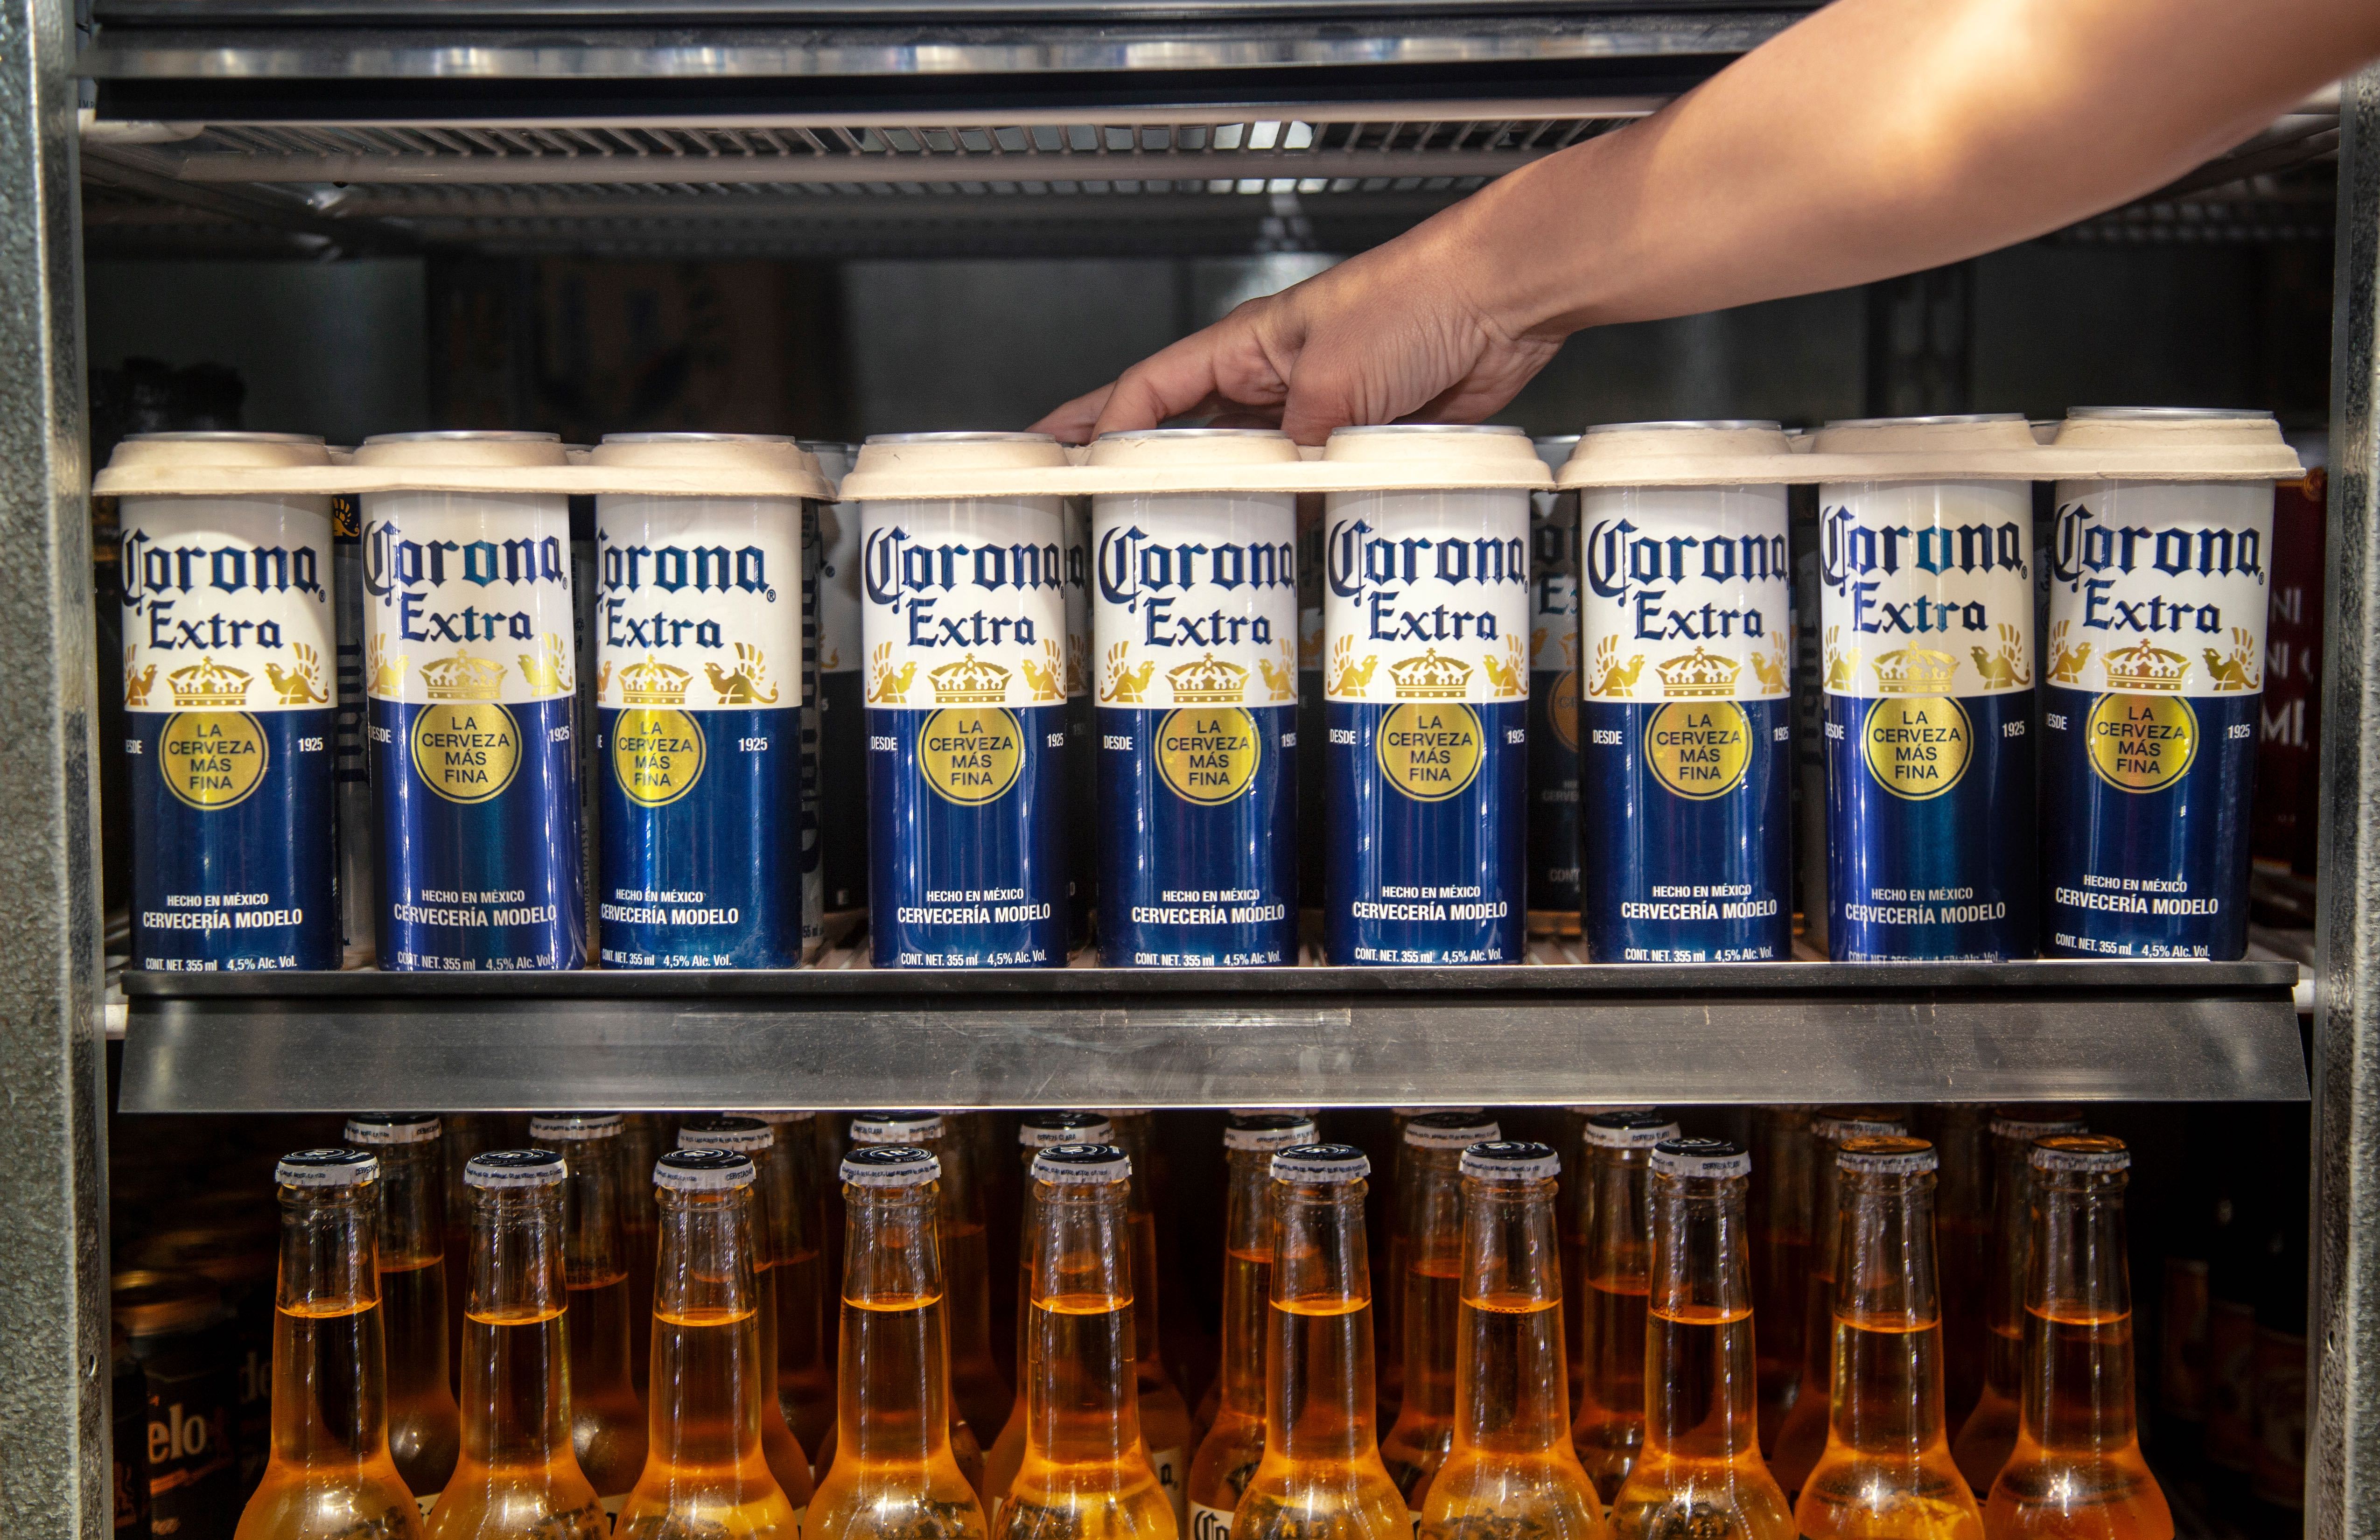 Mexican beer brand Corona to test plastic-free six pack rings